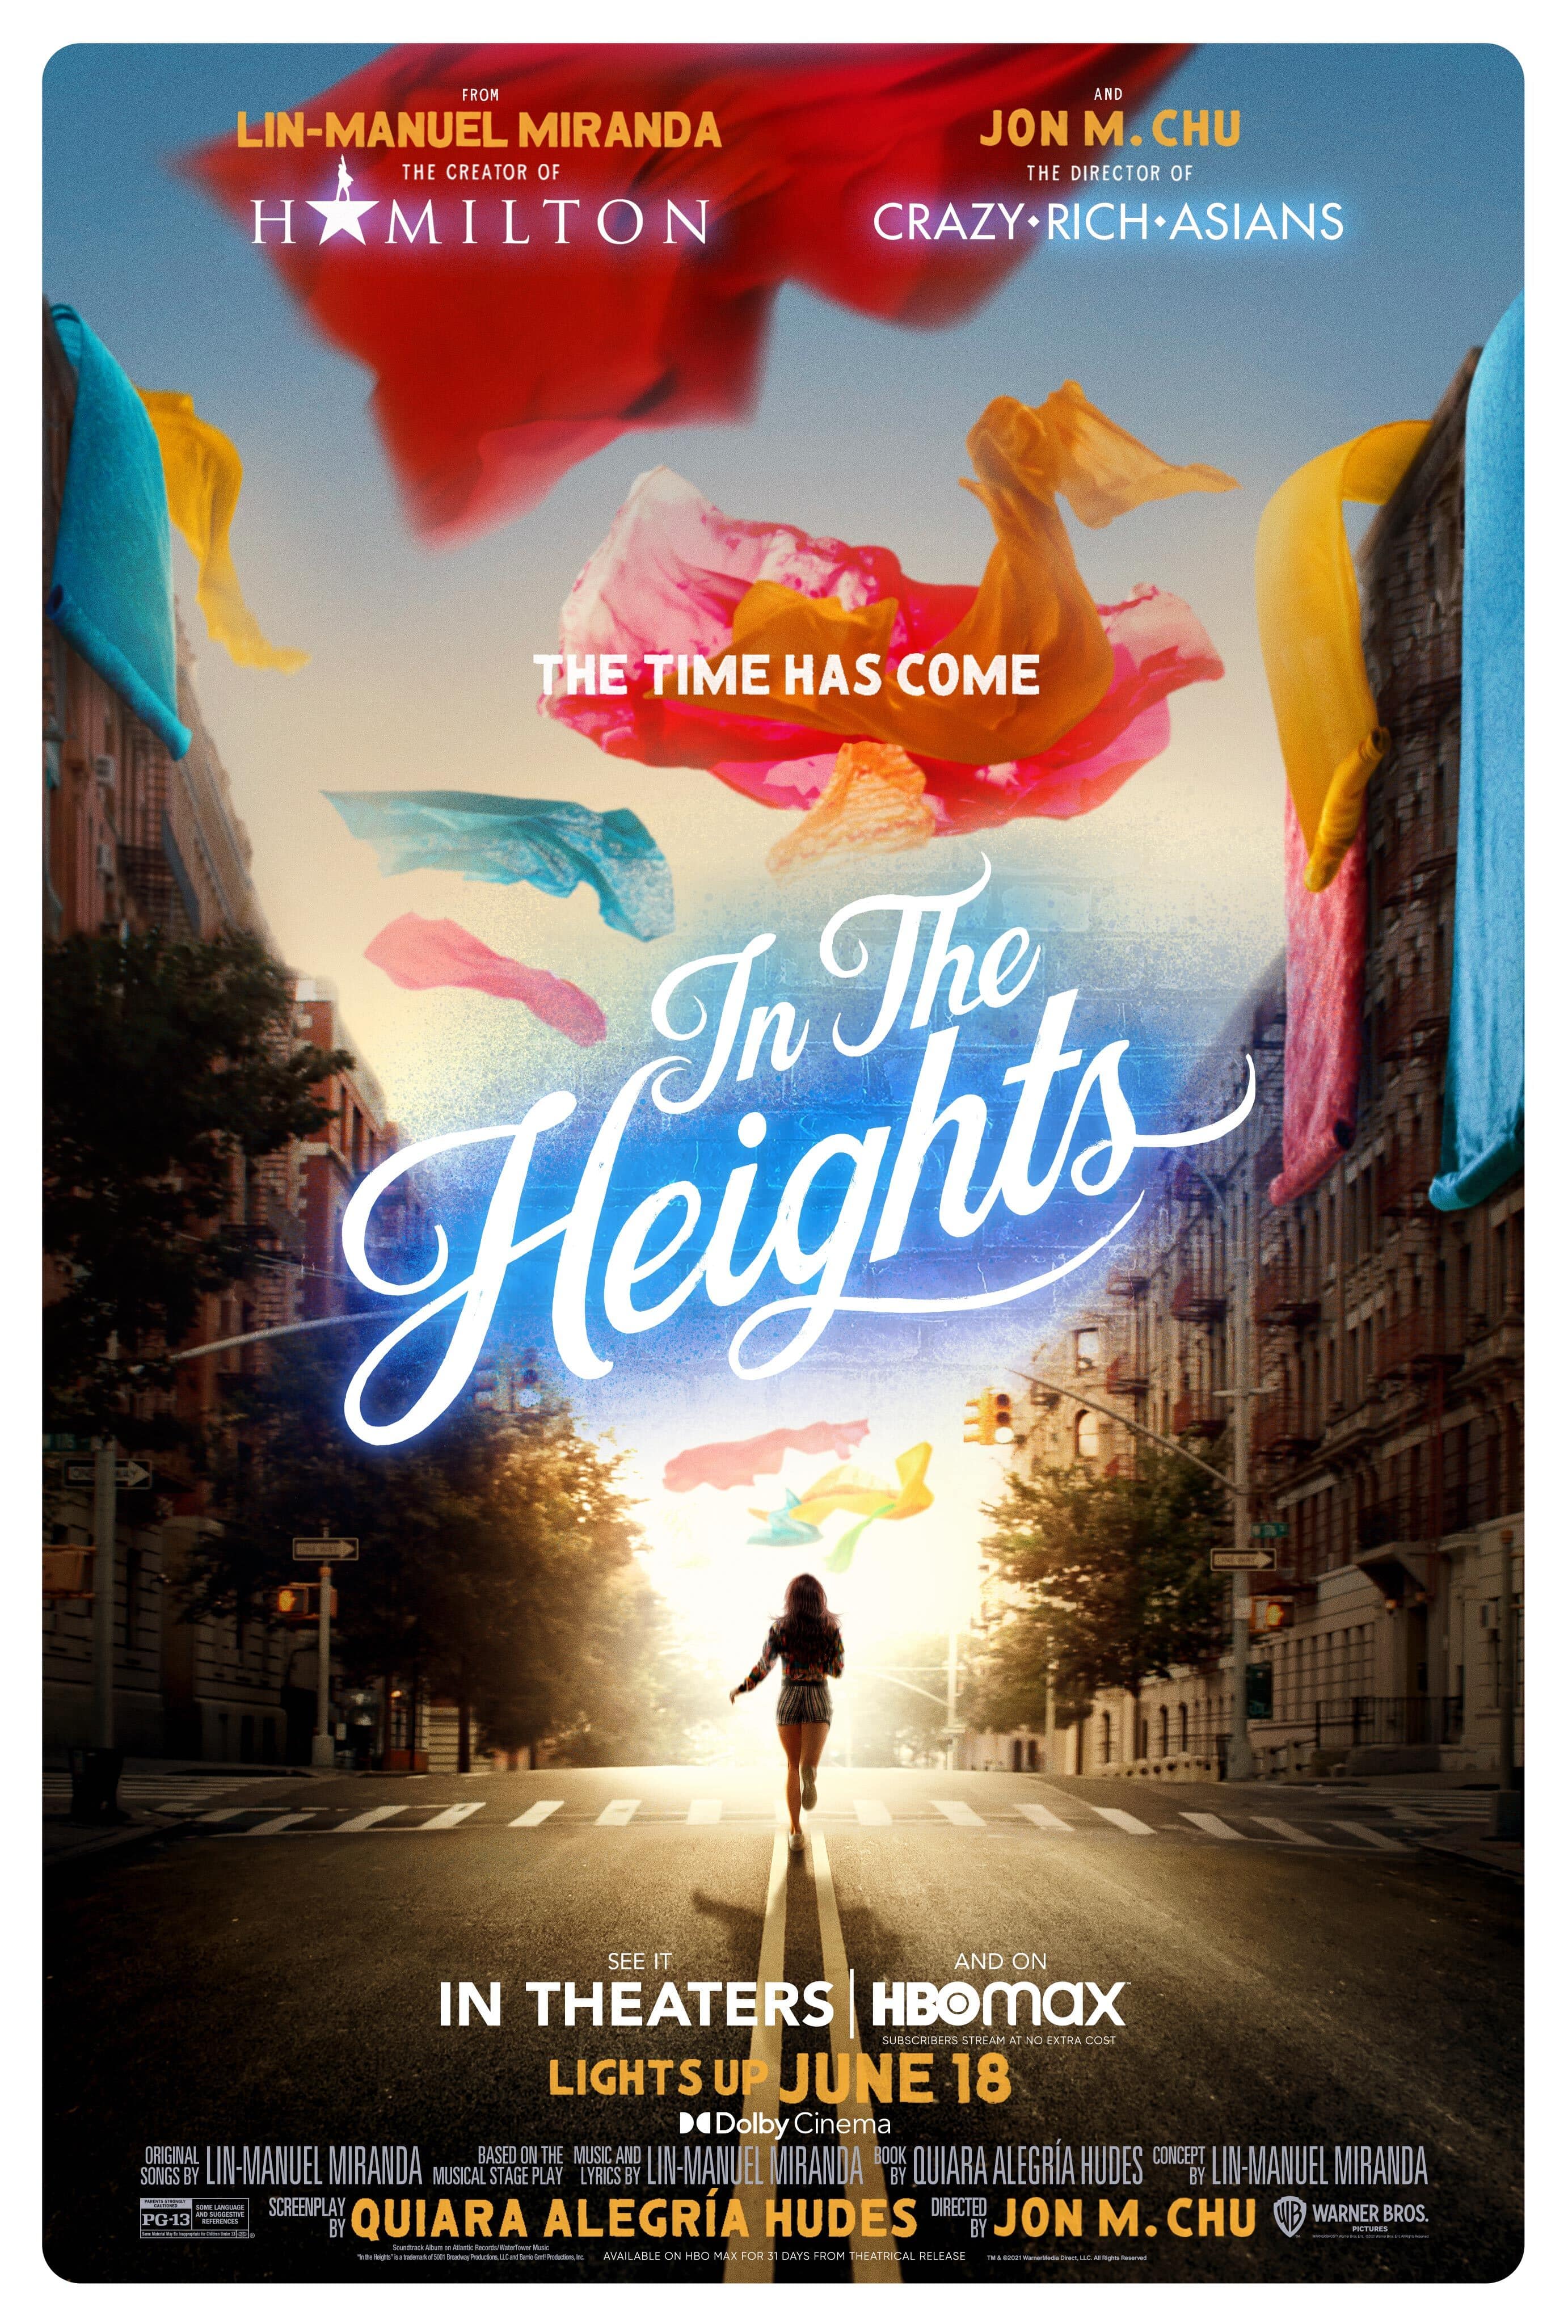 New In the Heights movie poster of a person walking down the street with colorful flags.